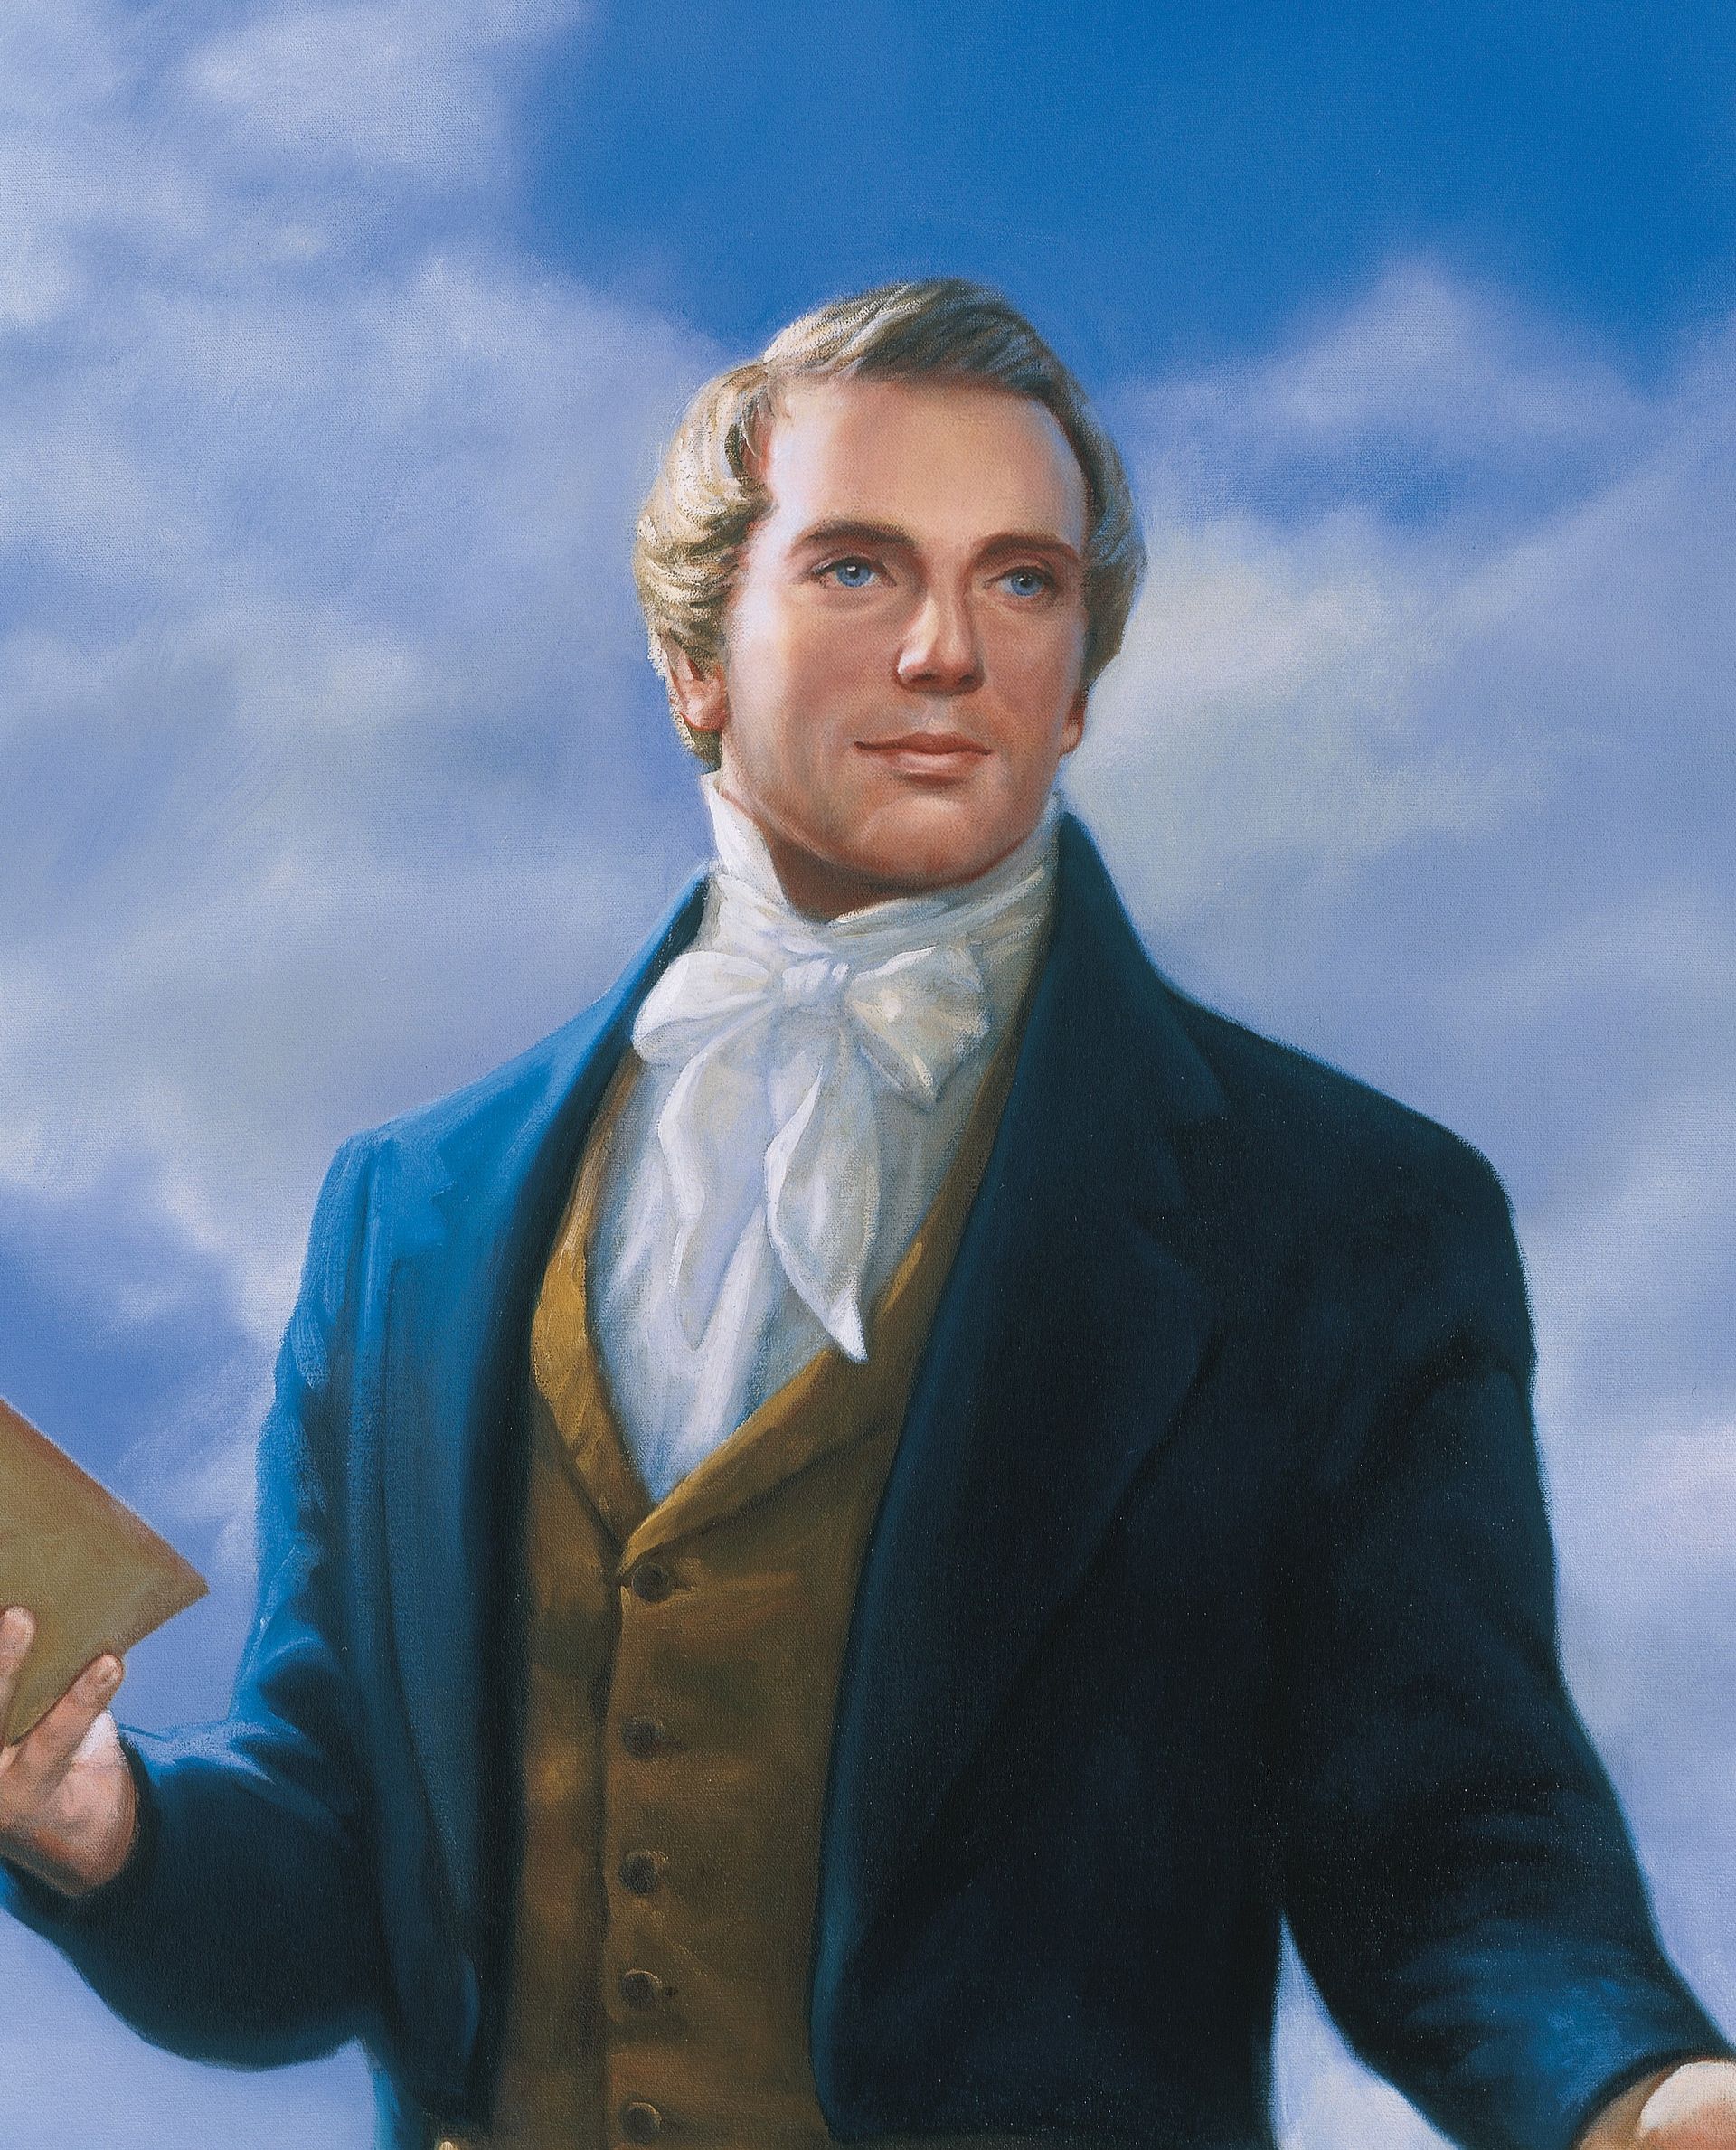 Brother Joseph, by David Lindsley (62161); GAB 87; nursery manual lesson 24, page 102; 2 Nephi 3:6–15; Doctrine and Covenants 5:9–10; 21:1–5; 27:13; 135:3; Joseph Smith—History
This image is to be used for Church purposes only.